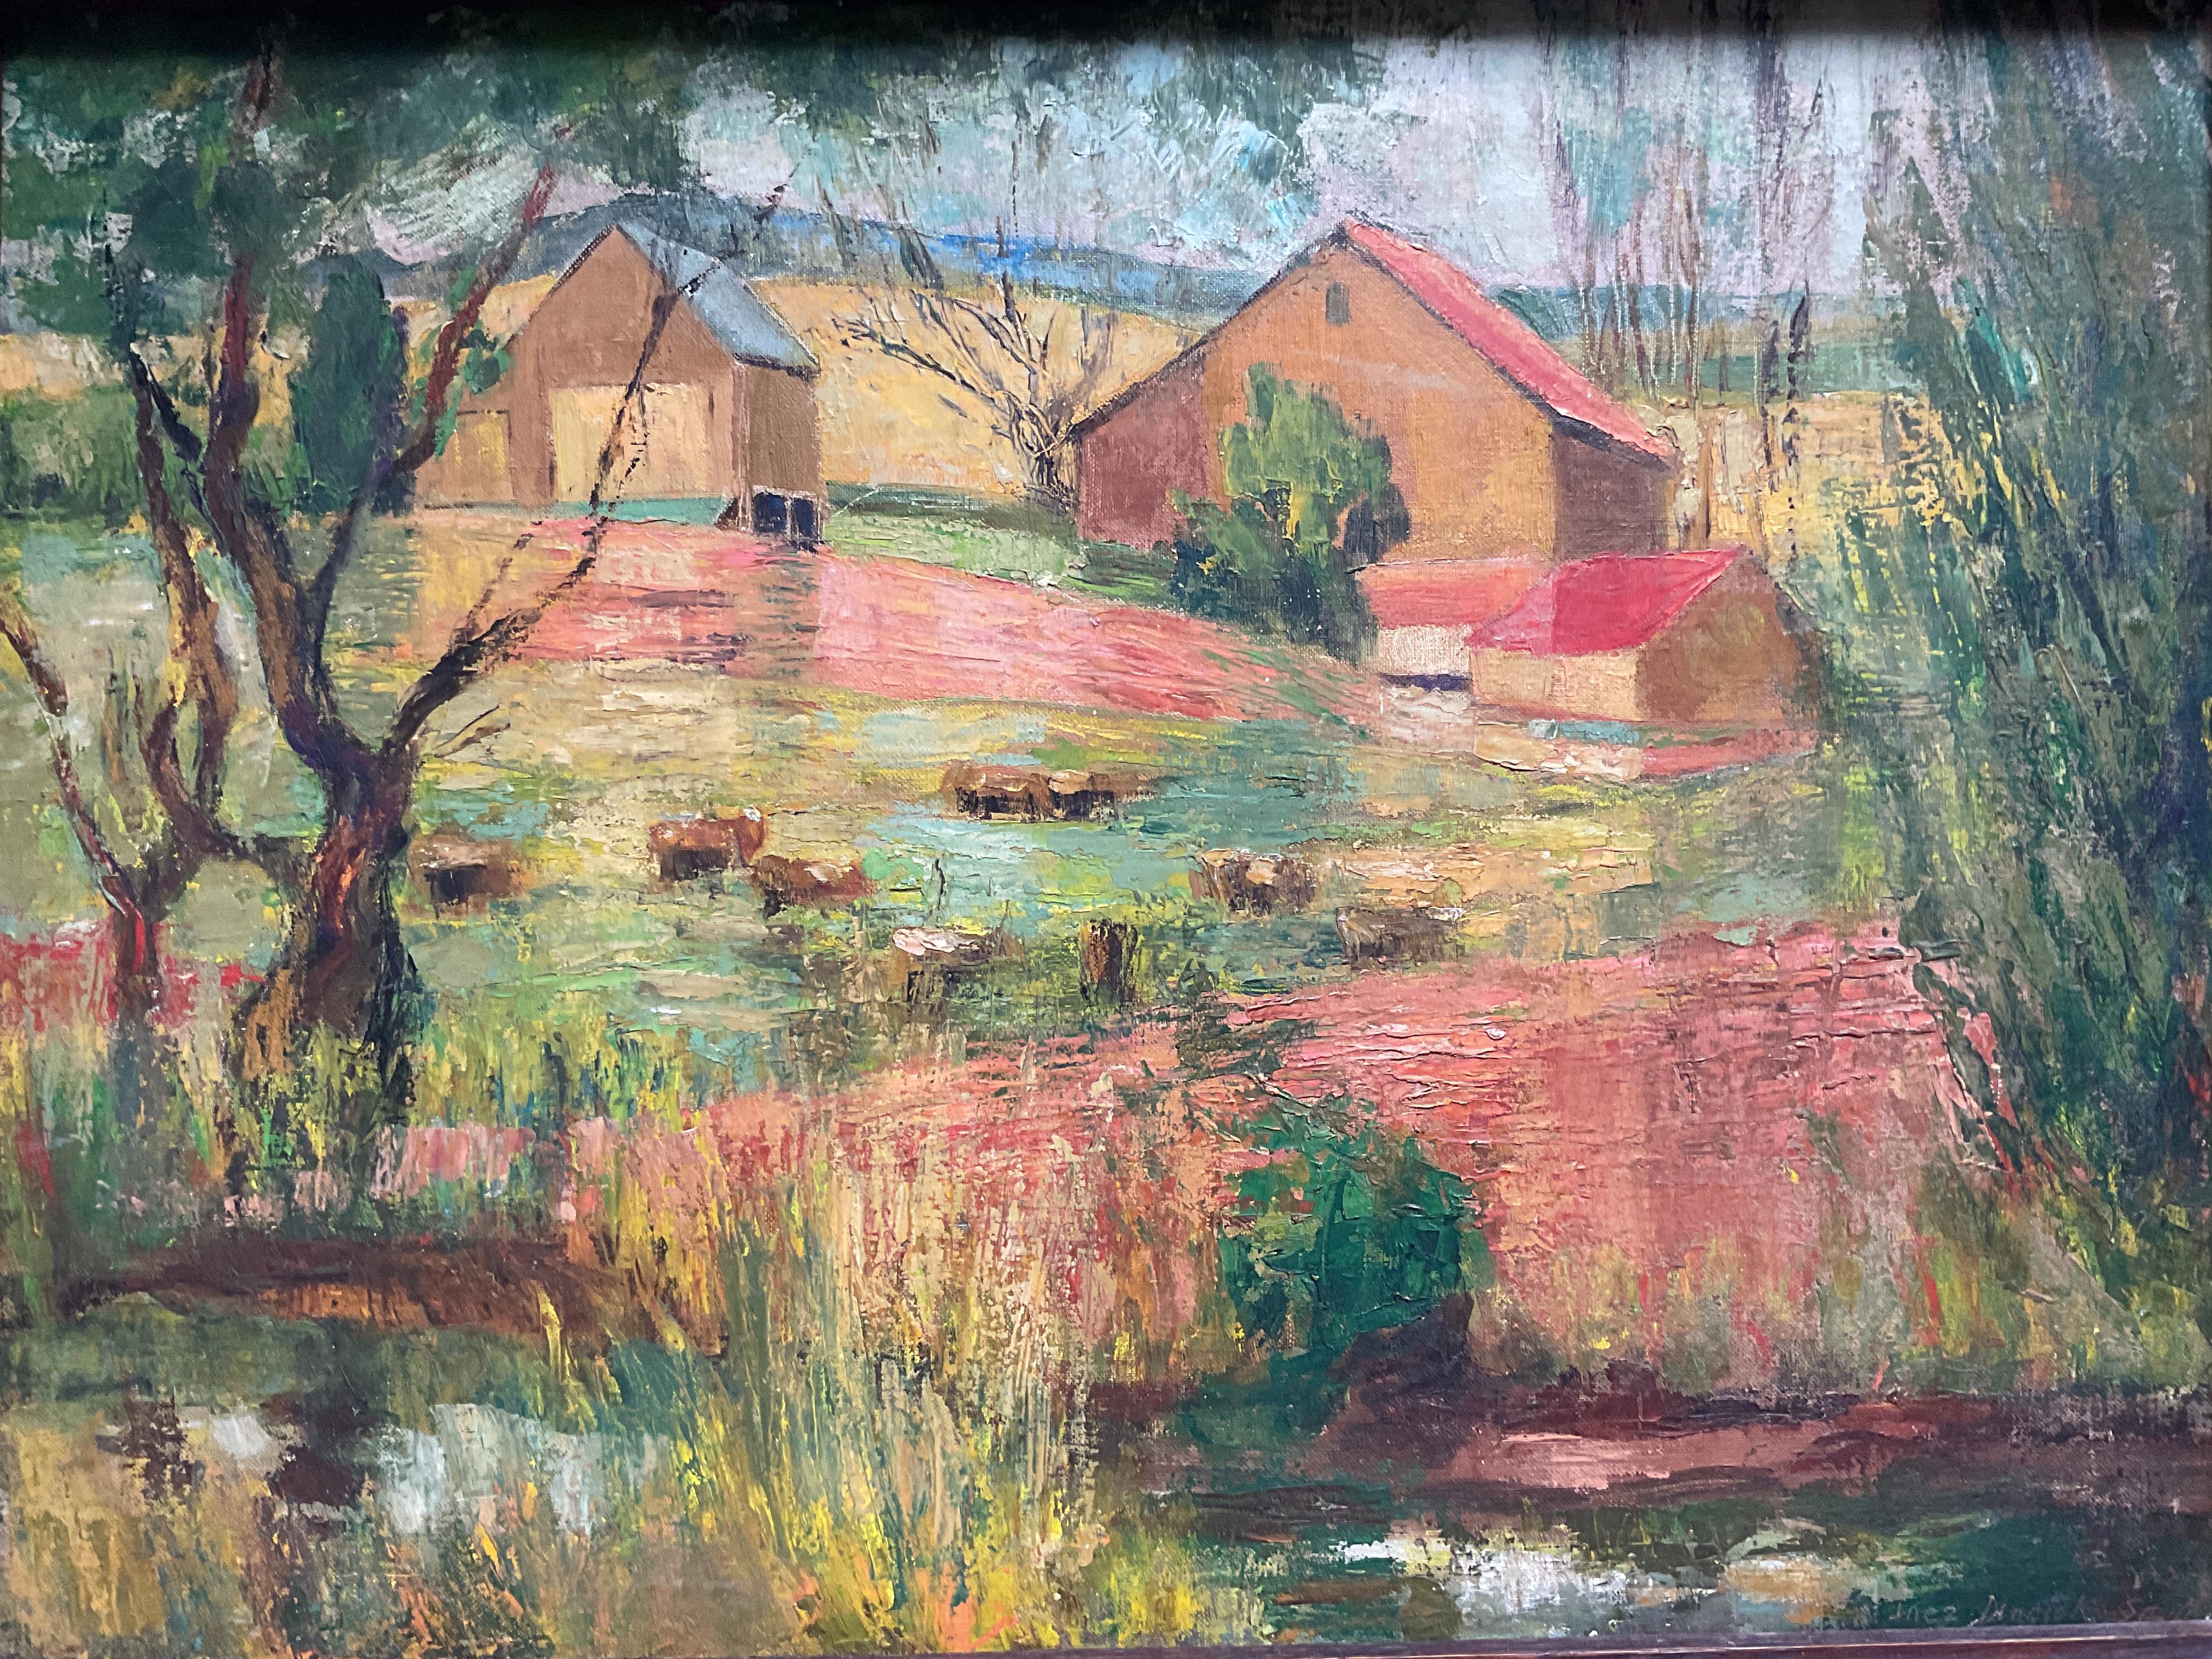 Vintage American Pennsylvania Farm Landscape; Signed Oil on Canvas, ca 1940’s - Painting by Inez Dunnick Smith